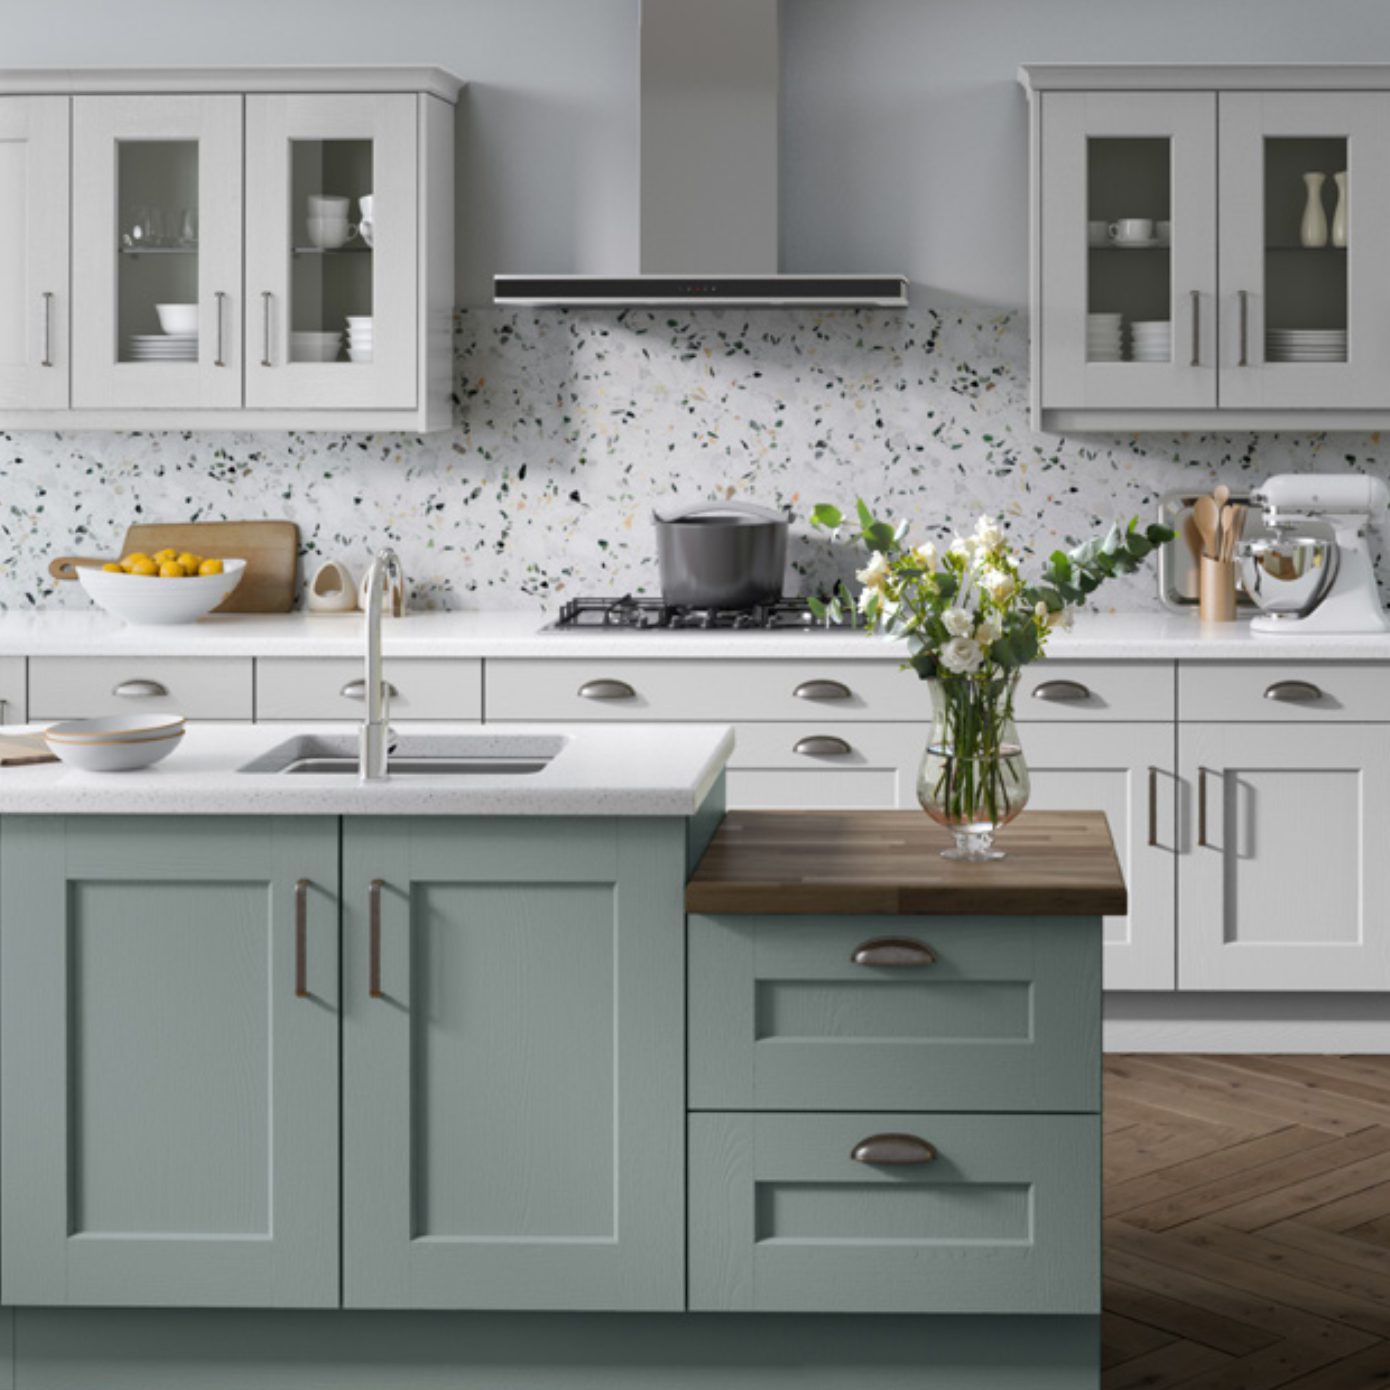 Painted shaker kitchen in light blue and white